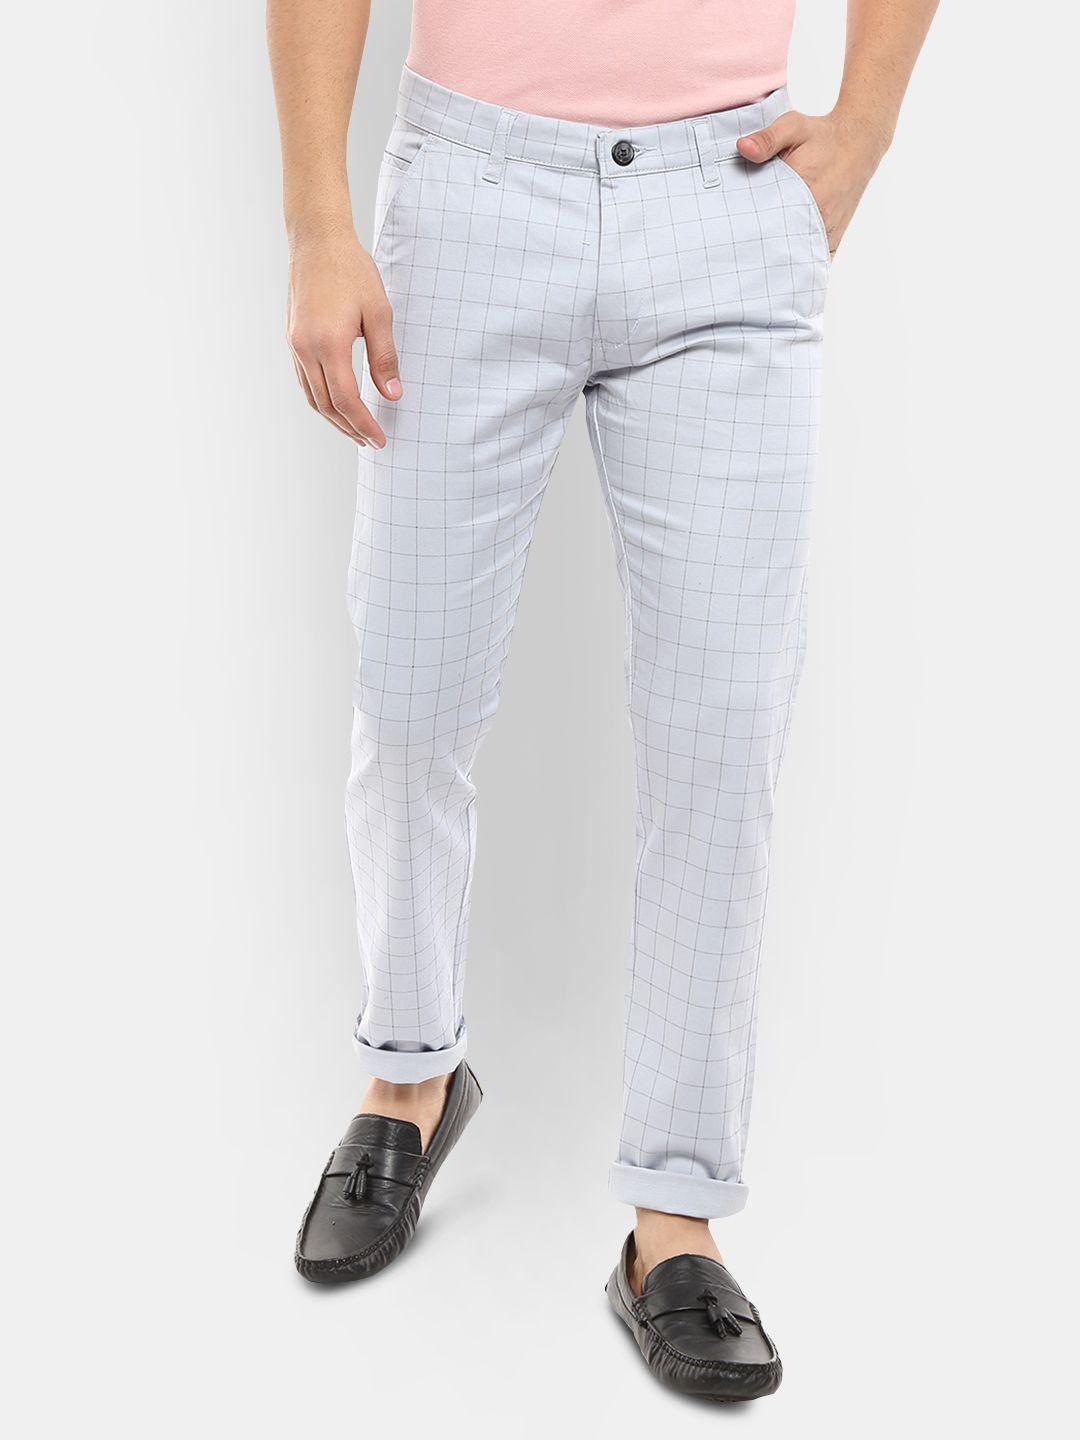 v-mart men blue checked chinos trousers